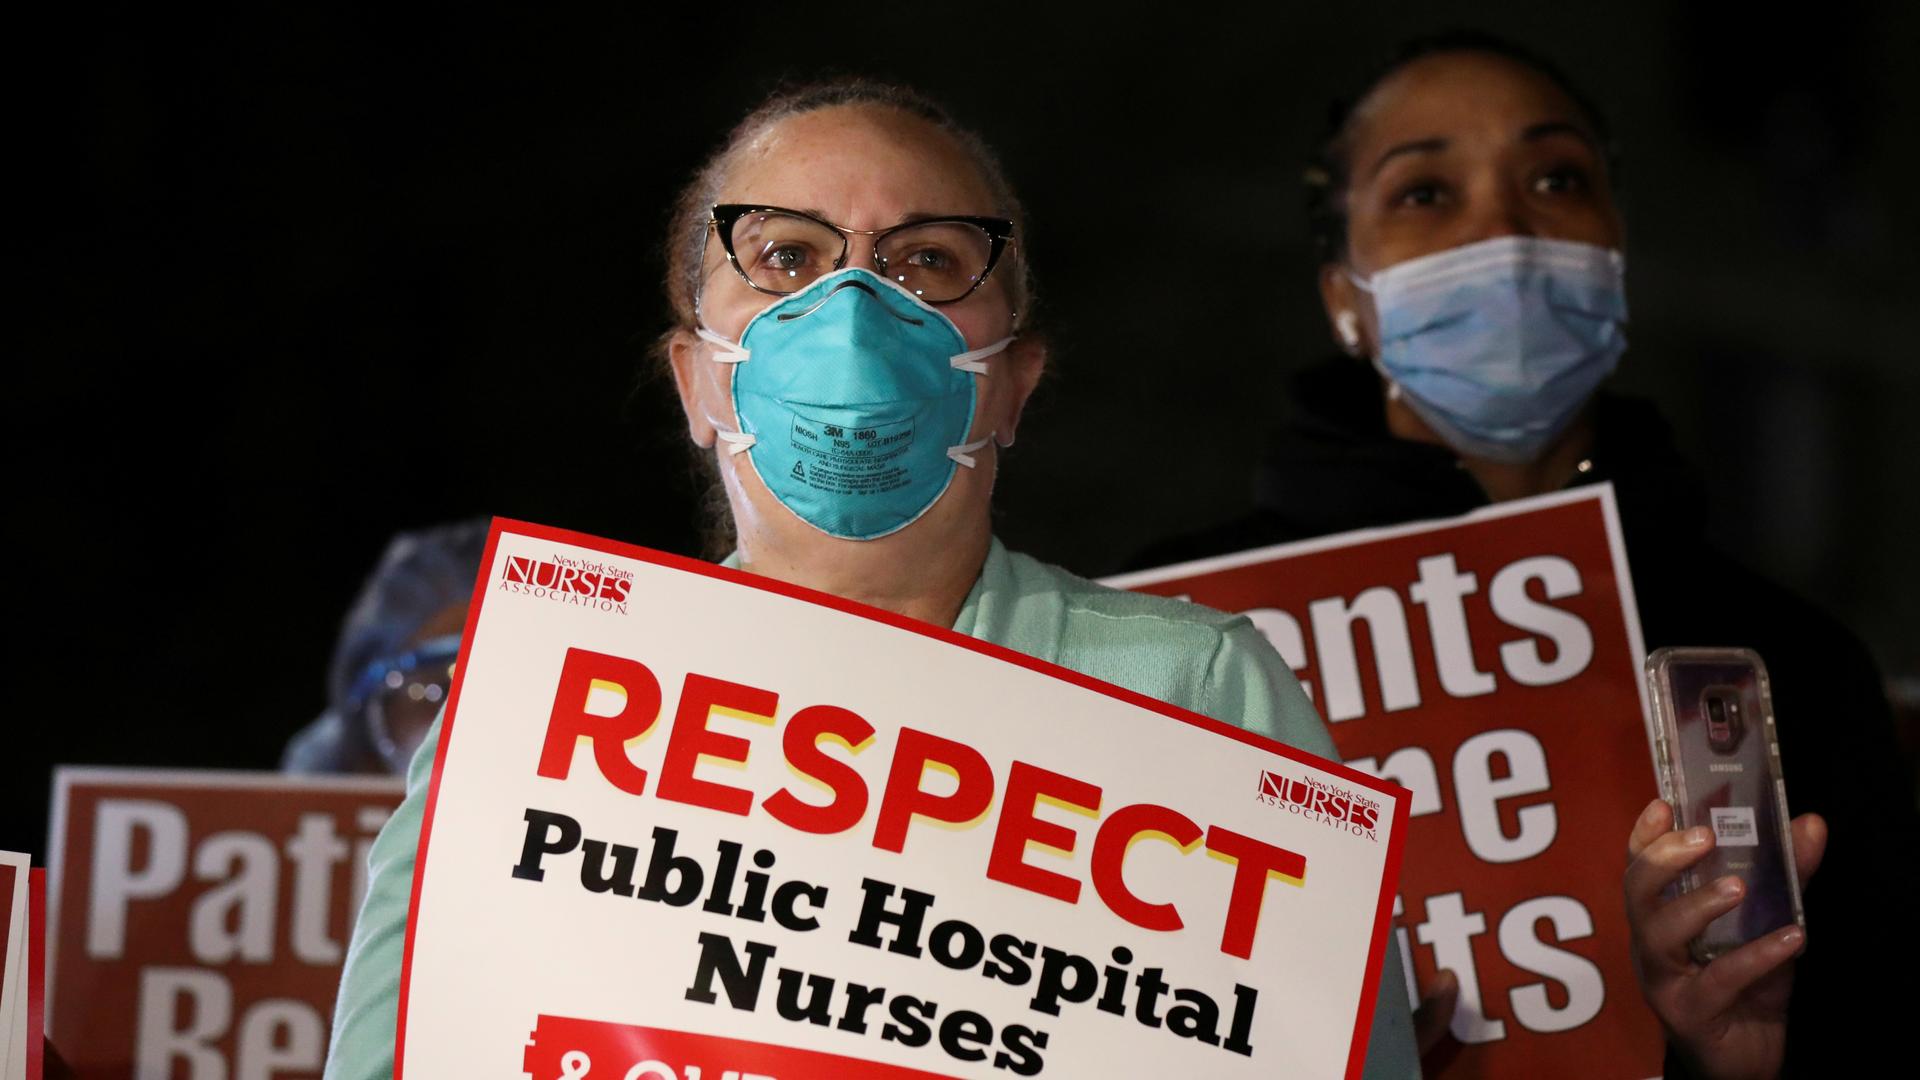 Two women stand with protest signs about respecting nurses